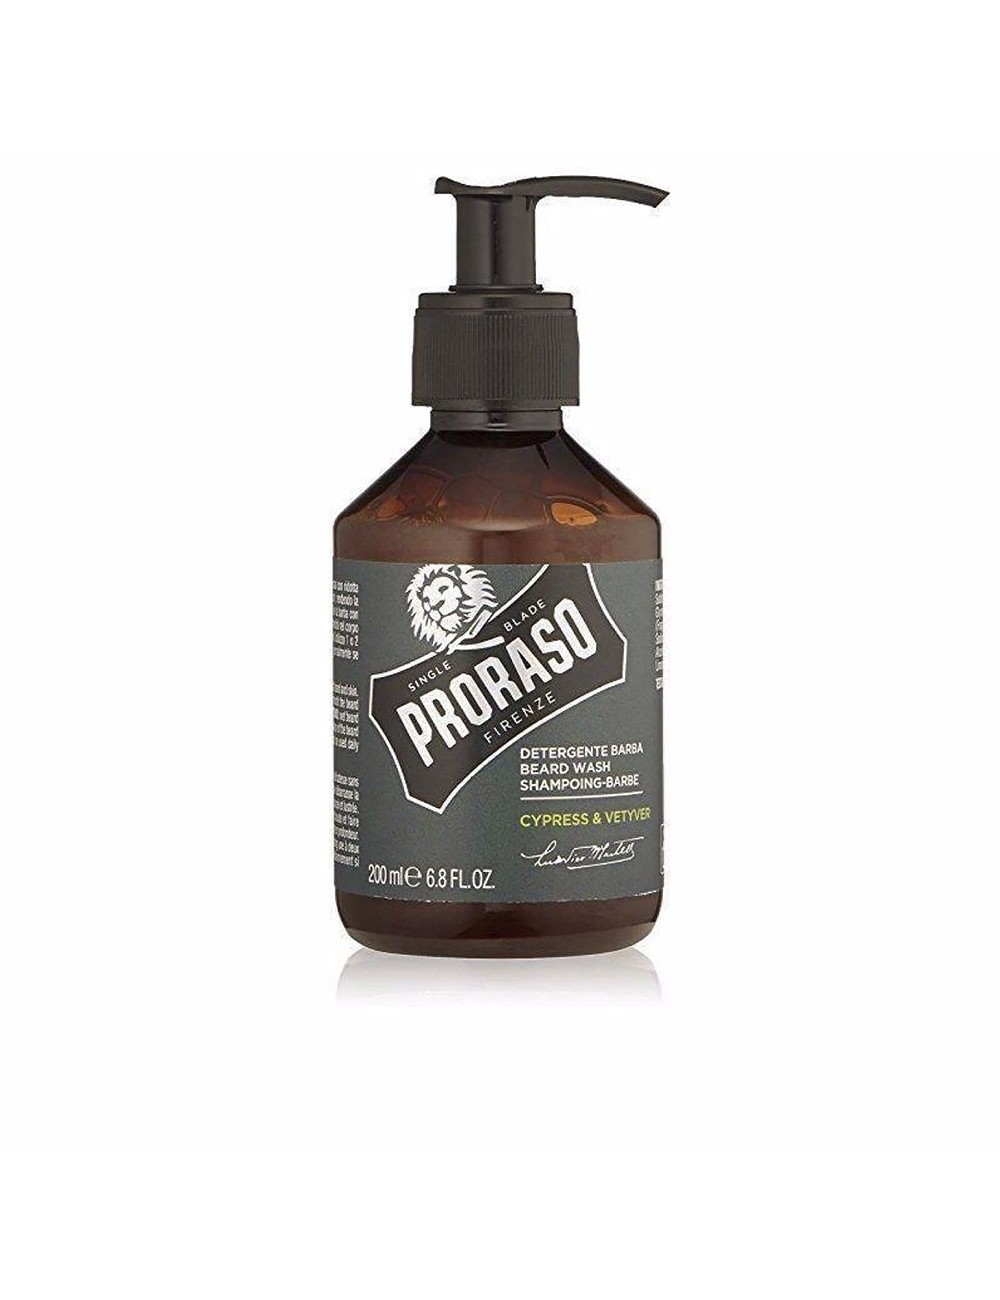 CYPRESS & VETYVER Shampoing pour barbe 200 ml